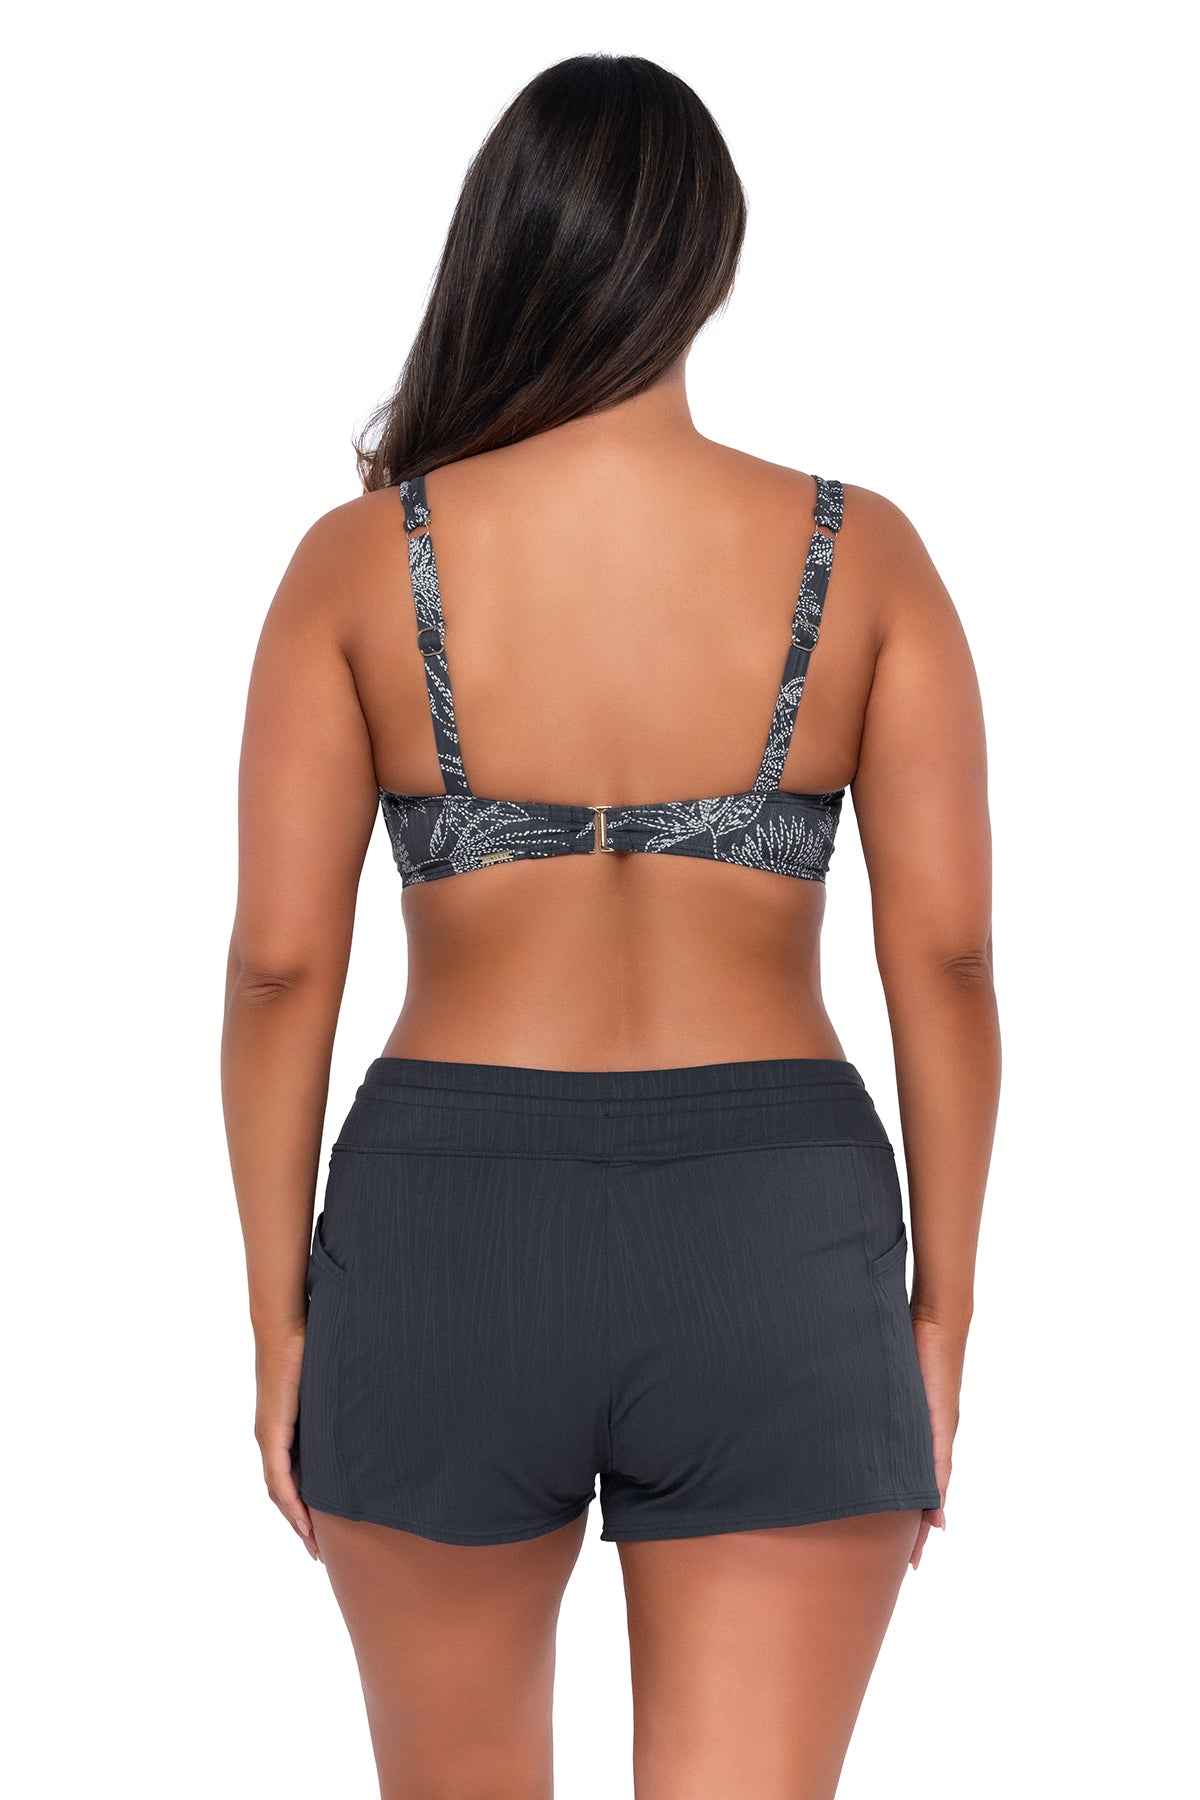 Back pose #1 of Nicky wearing Sunsets Fanfare Seagrass Texture Taylor Bralette Top with matching Laguna Swim Short